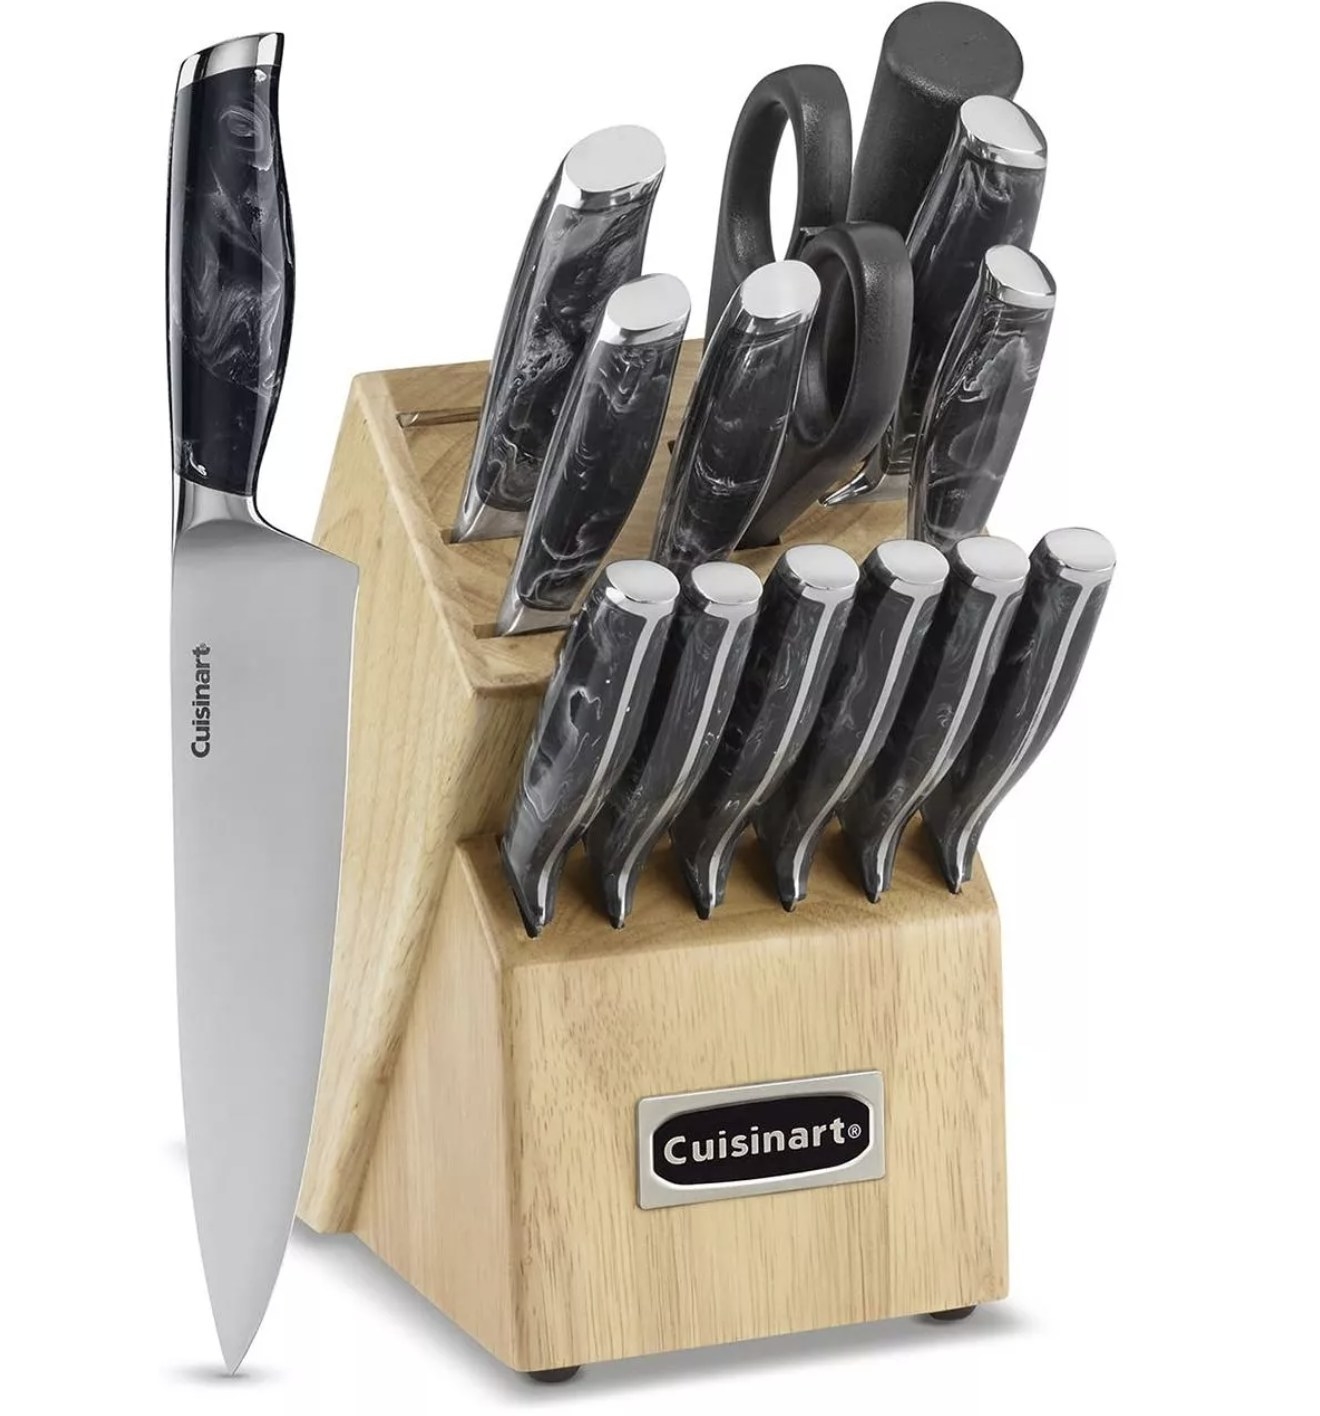 A knife block set with black marble handles